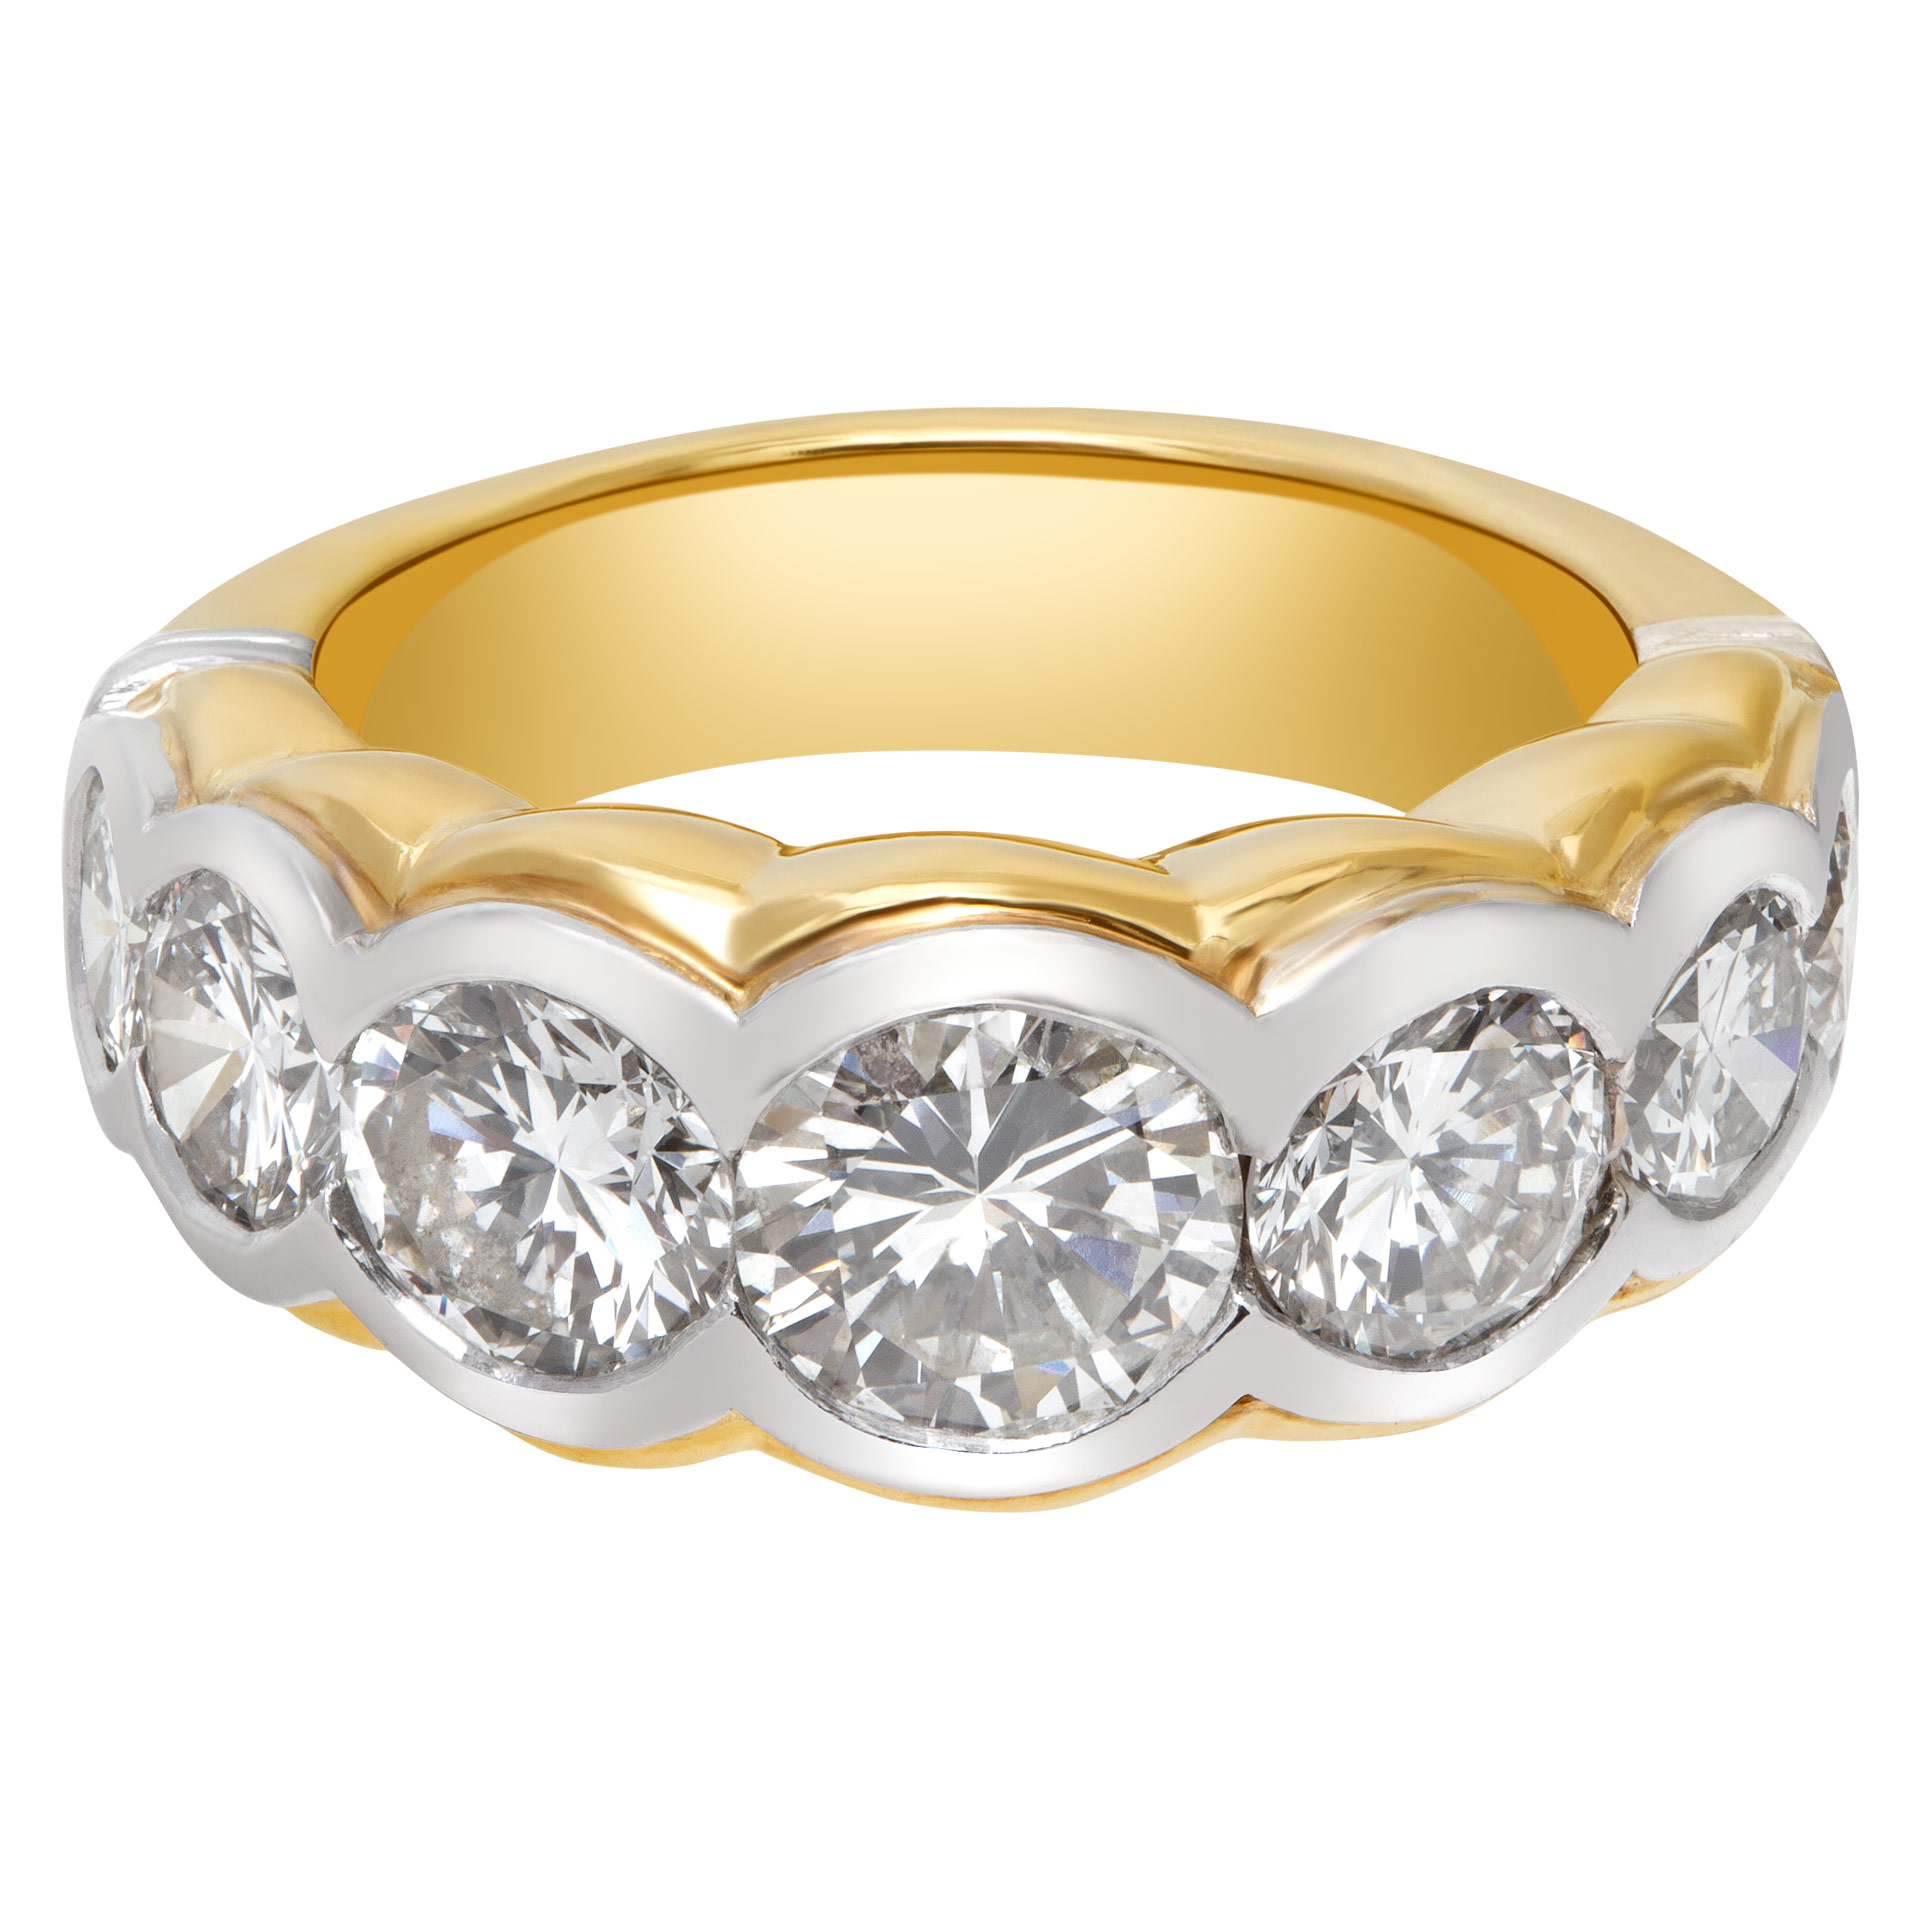 Dazzling diamond ring in platinum & 18k with approx. 3.65ct image 1